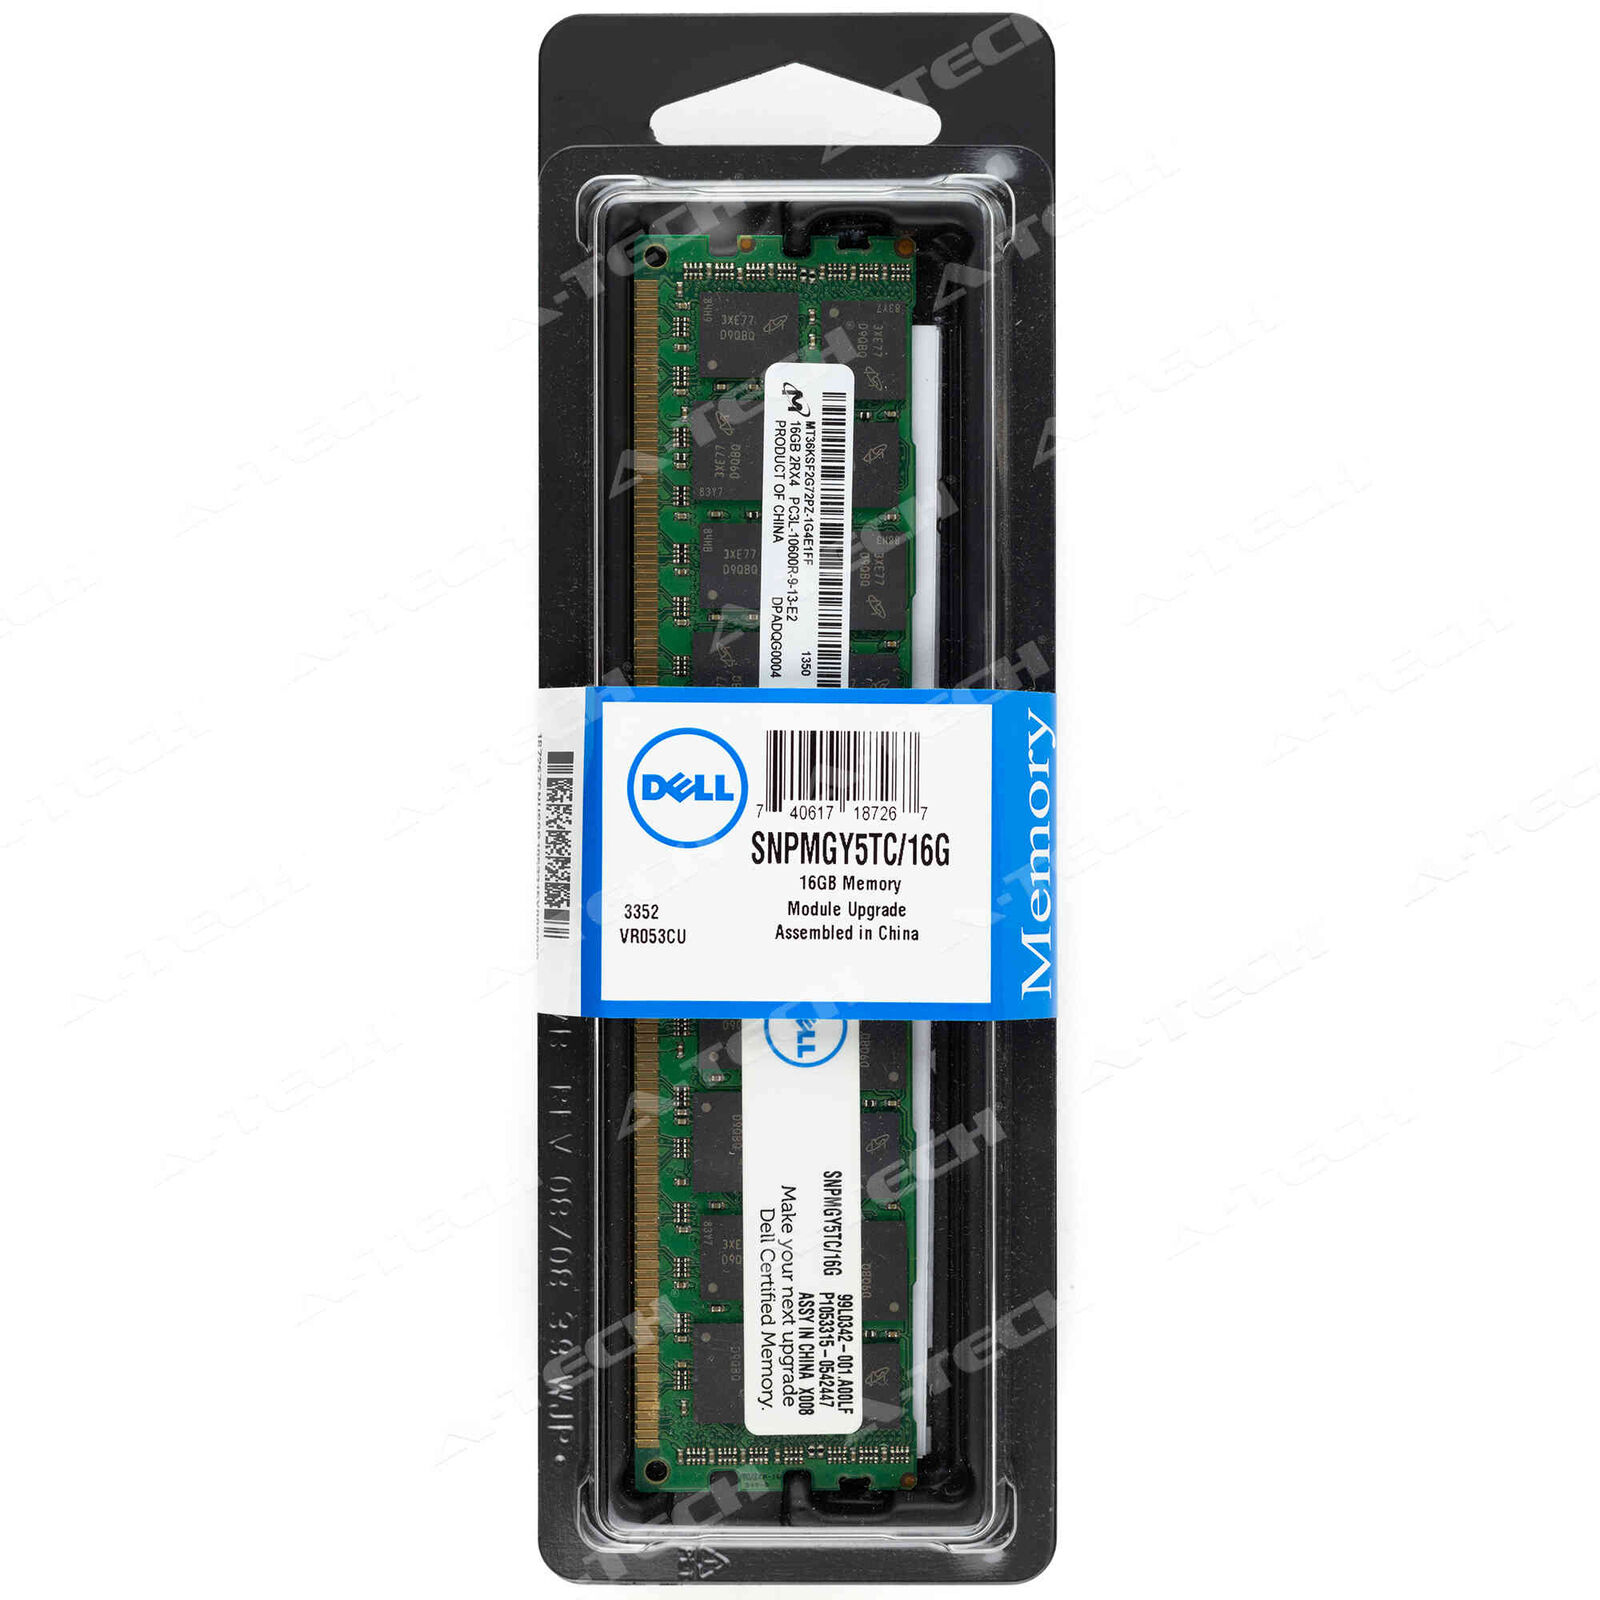 Dell 16GB DDR3 PC3-10600R RDIMM SNPMGY5TC/16G A6996789 Factory Sealed Memory RAM